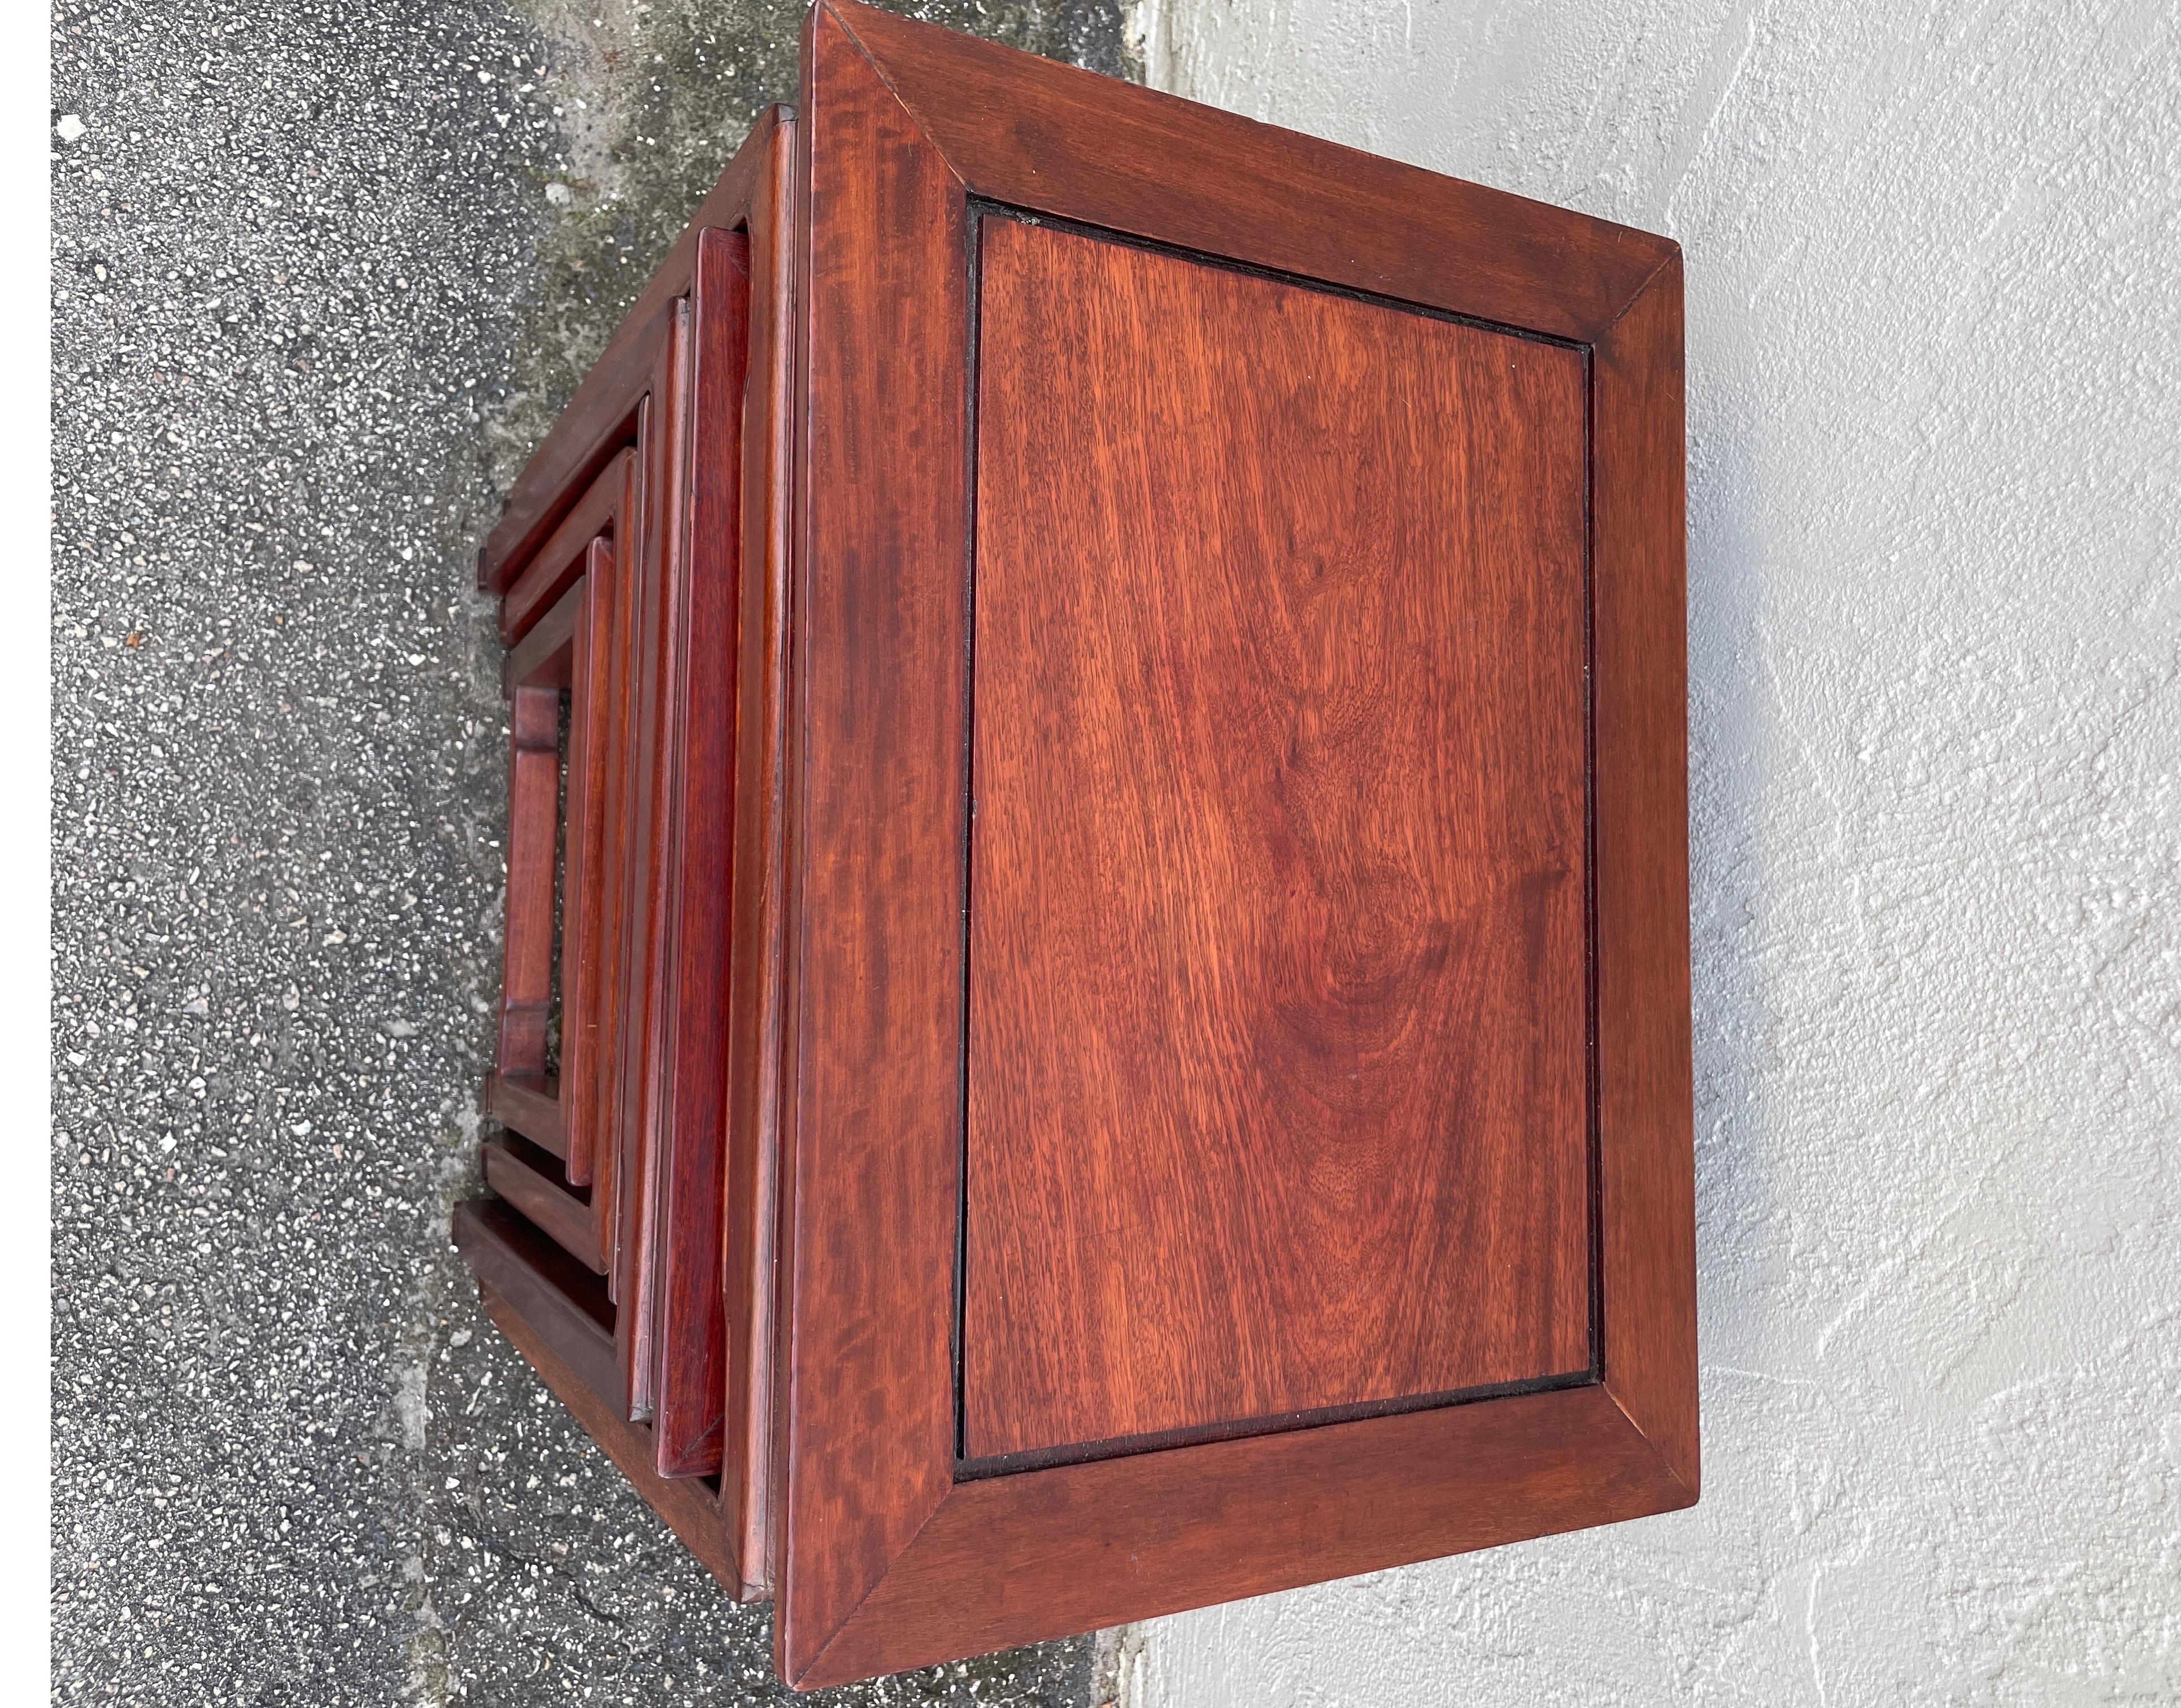 Set of four vintage rosewood Ming style nesting tables. A very simple and elegant design.